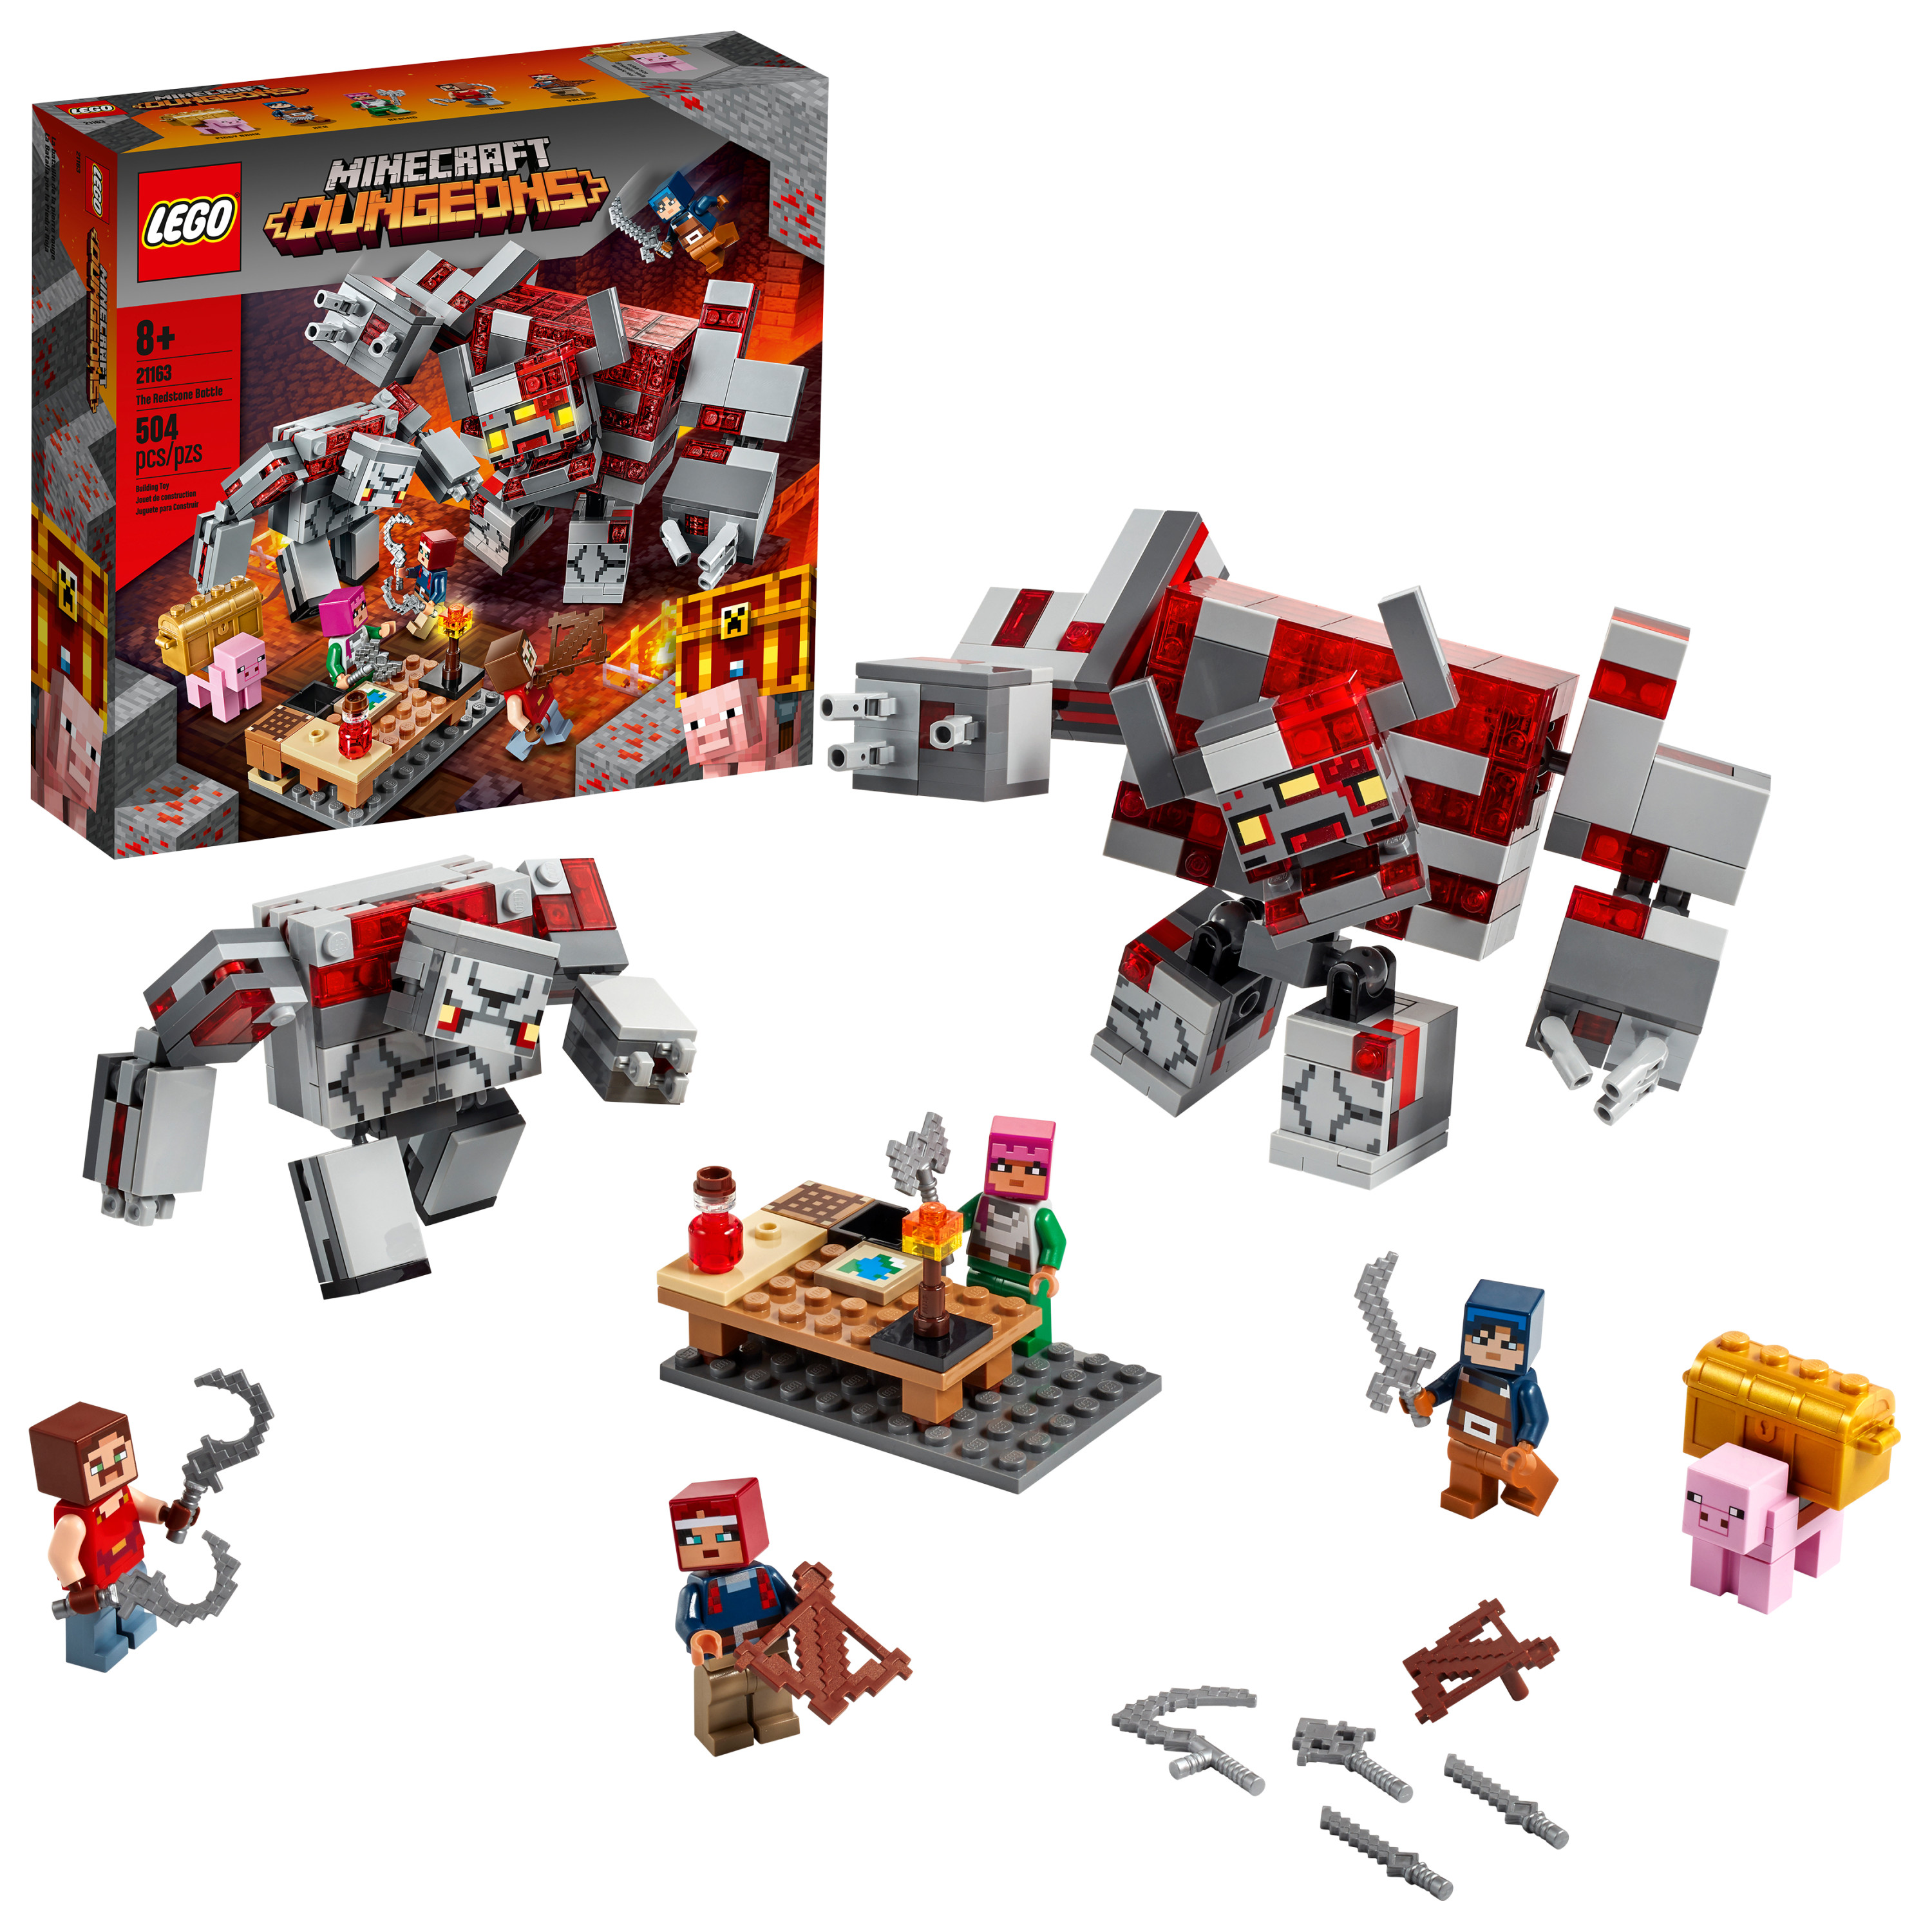 LEGO Minecraft The Redstone Battle 21163 Cool Action Playset for Kids (504 Pieces) - image 1 of 8